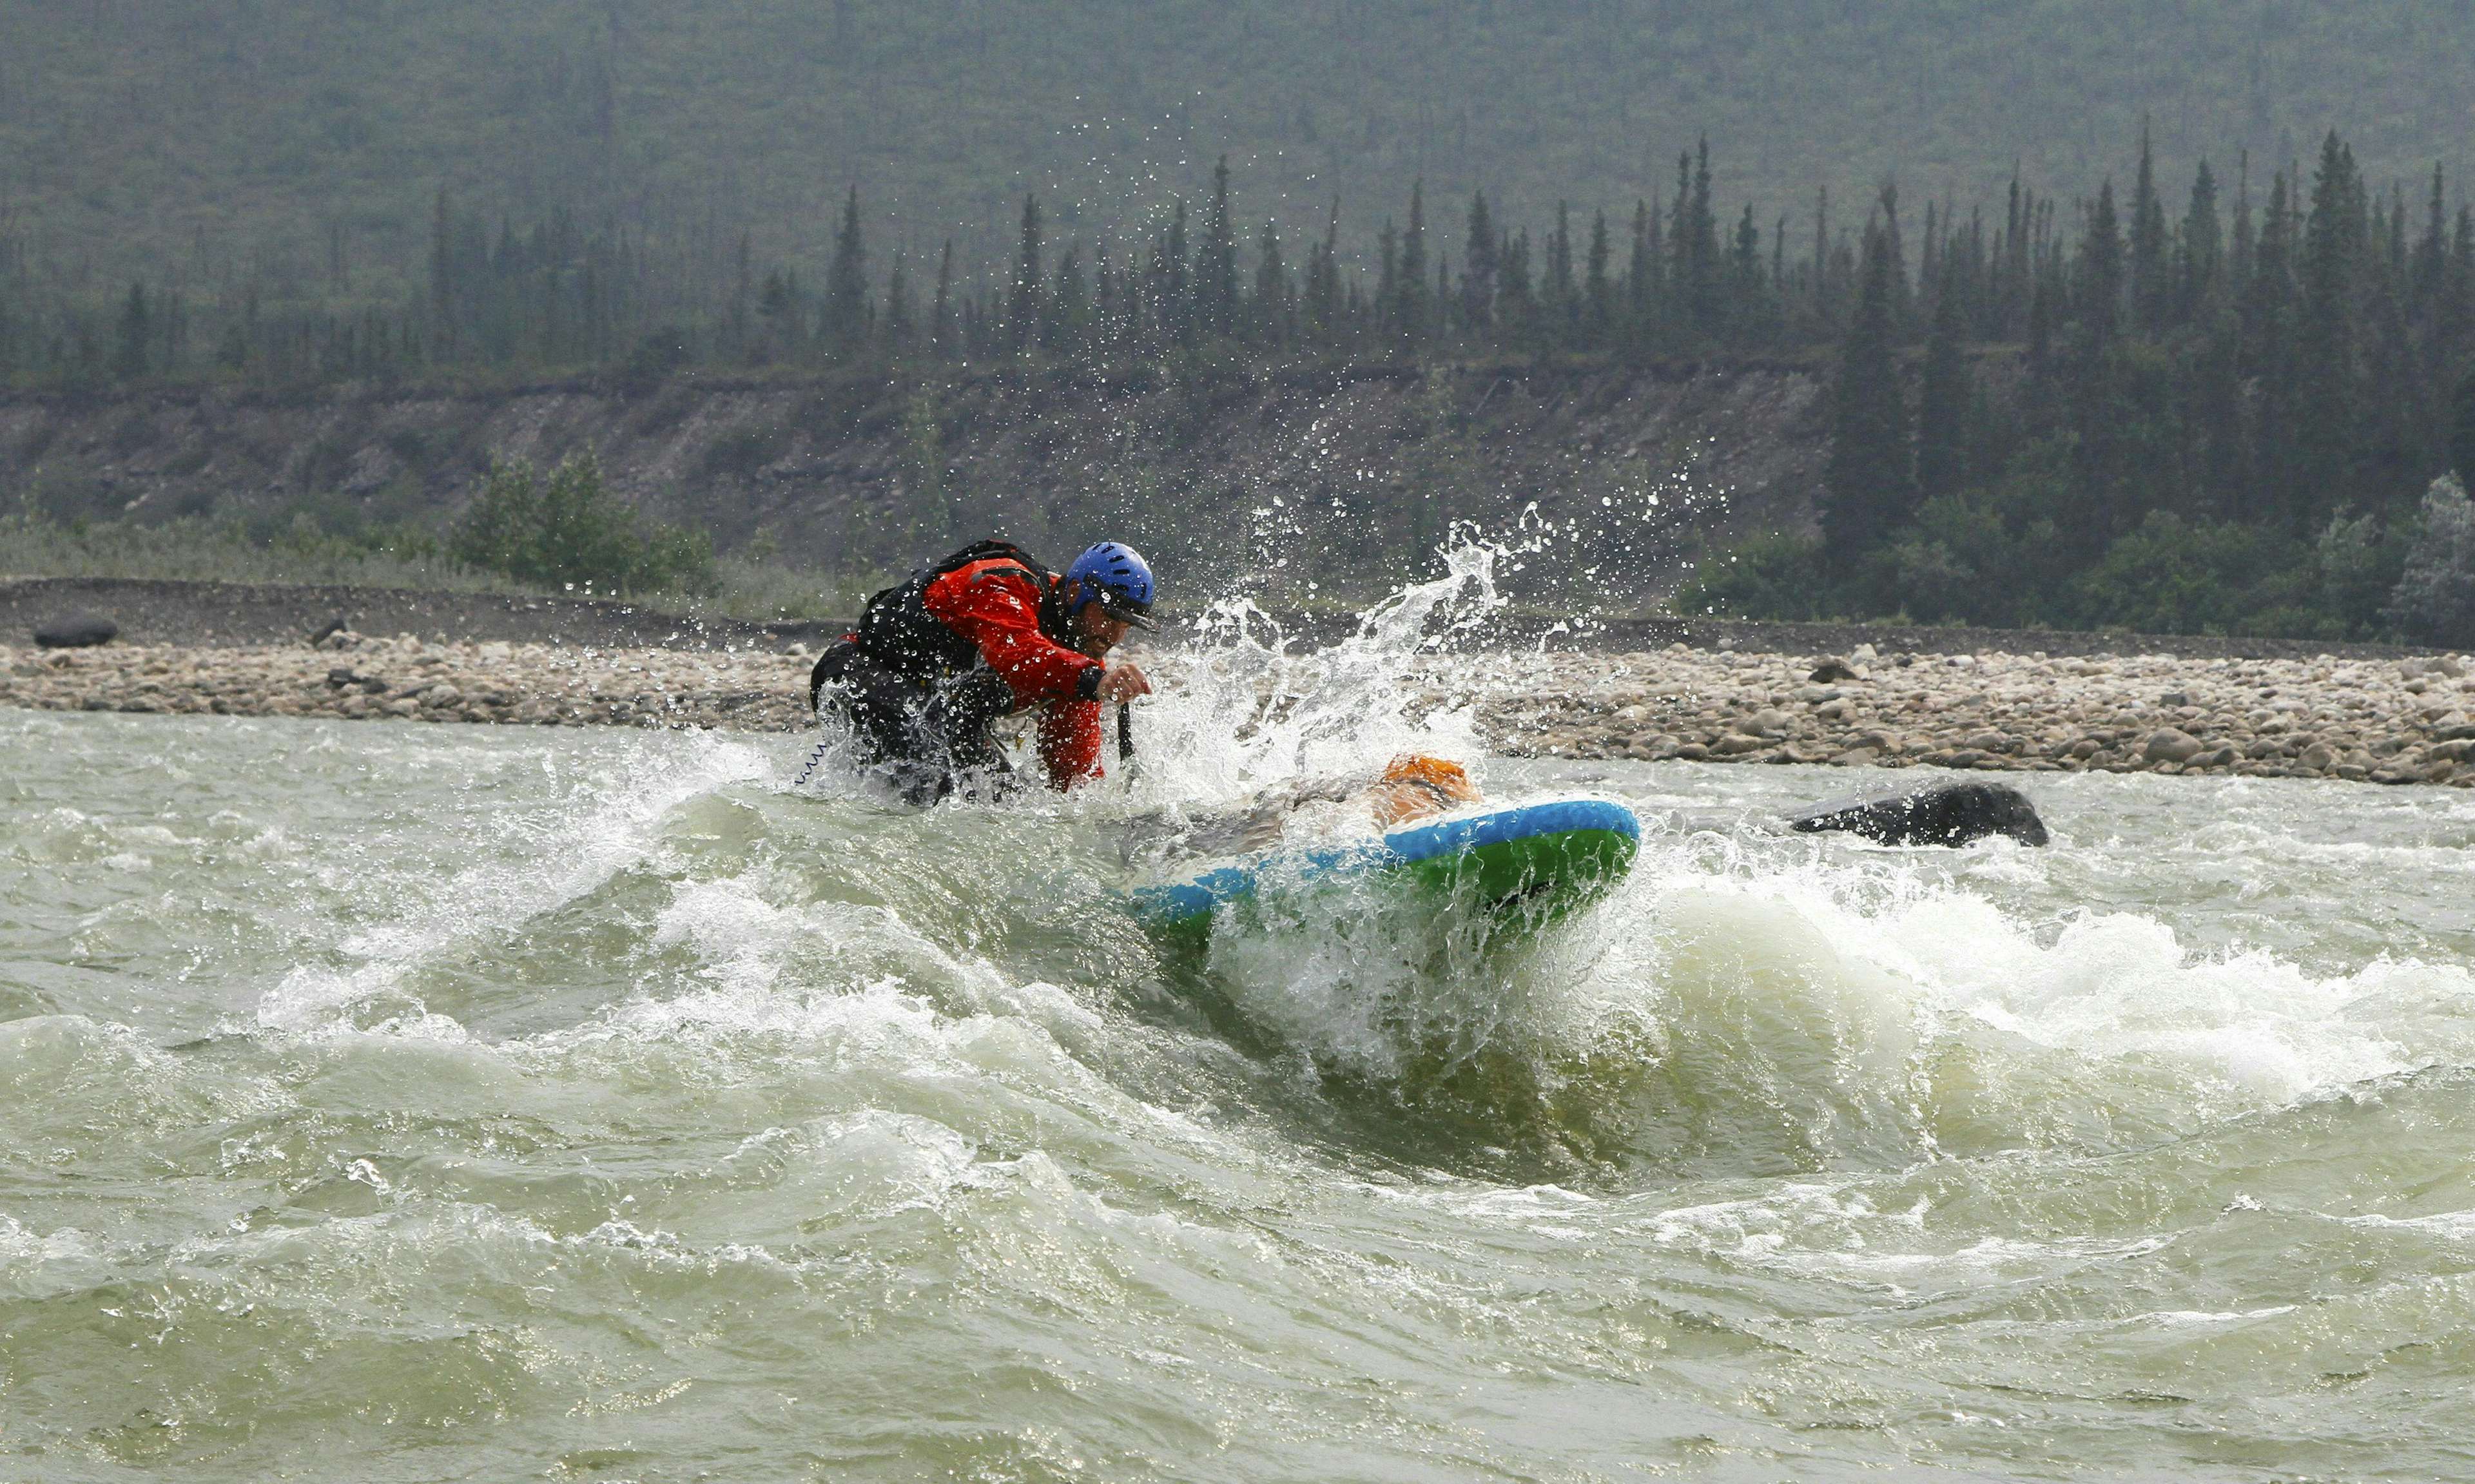 Sending an amazing rapid on the Mountain River, NWT, as part of a SUP expedition supported by MEC. Photo: Jimmy Martinello.